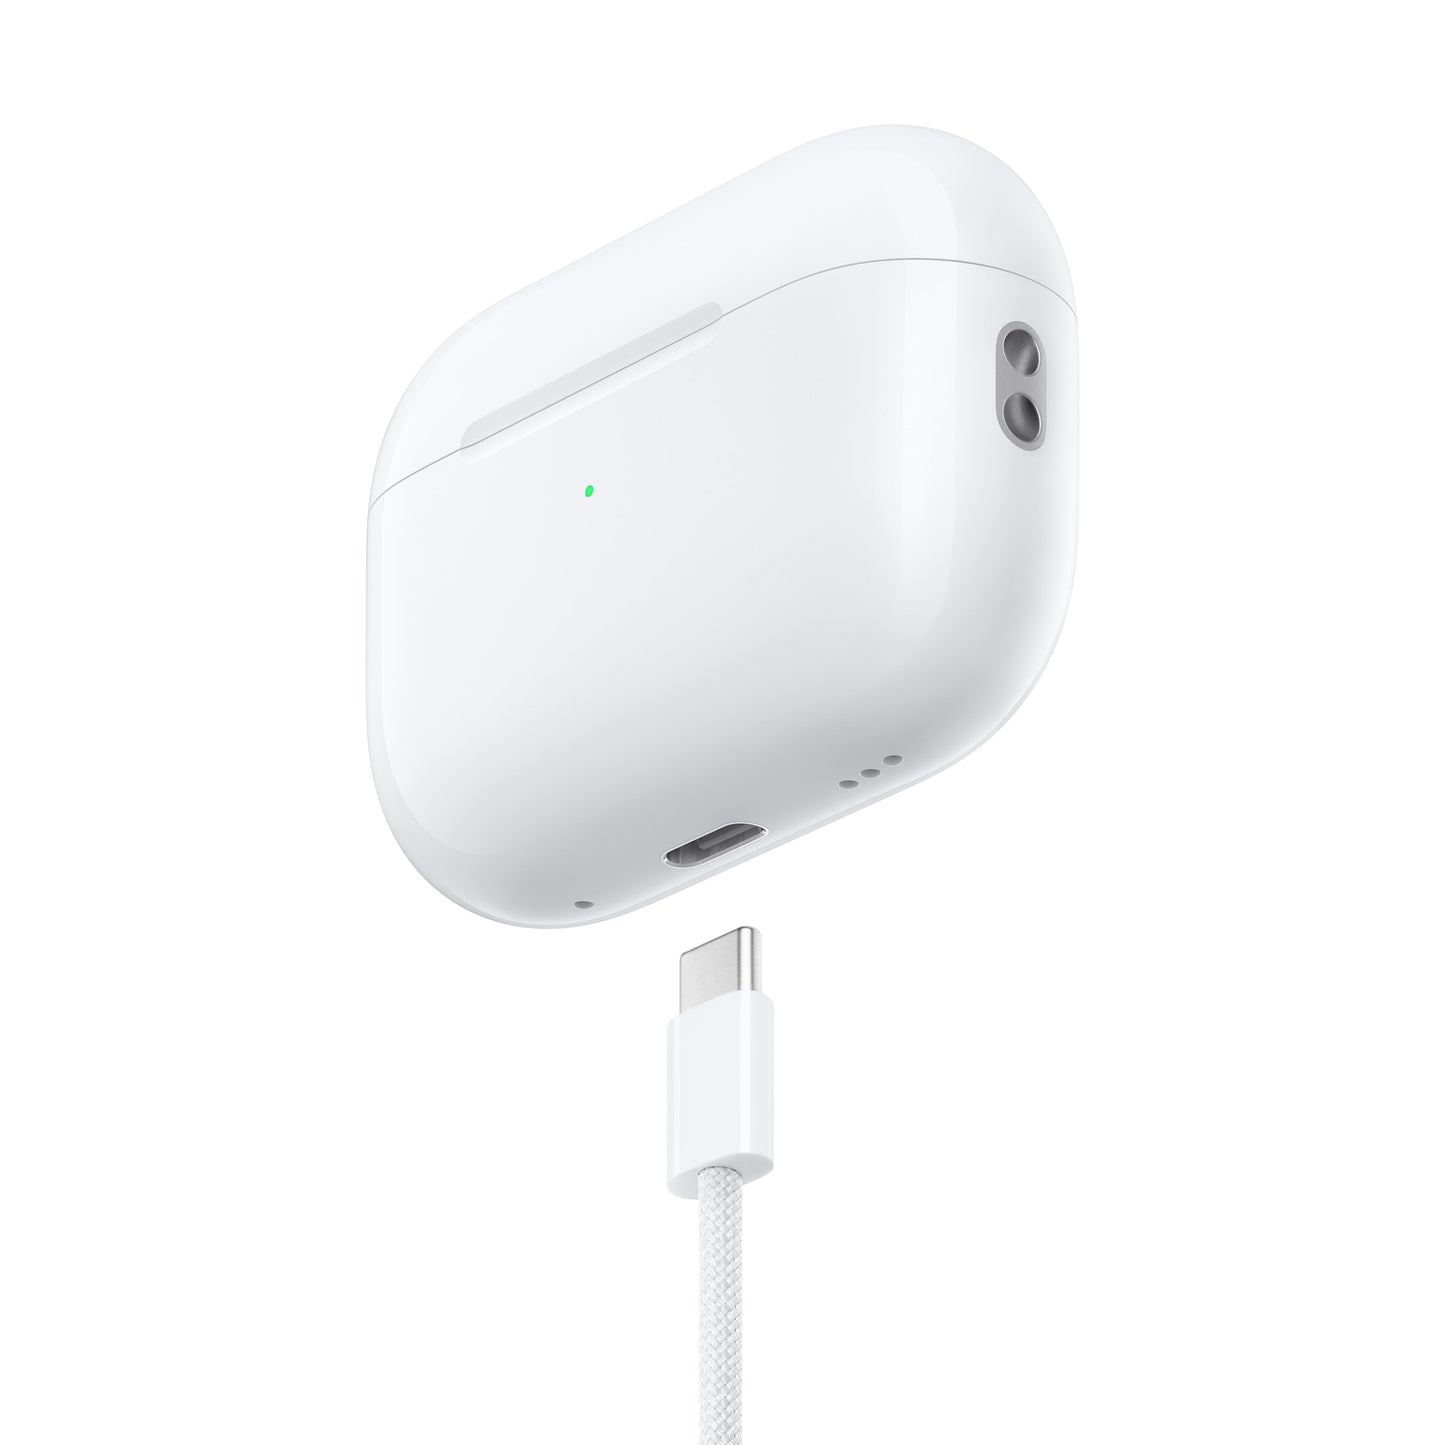 AirPods Pro (2nd generation) with MagSafe Case (USB_C)